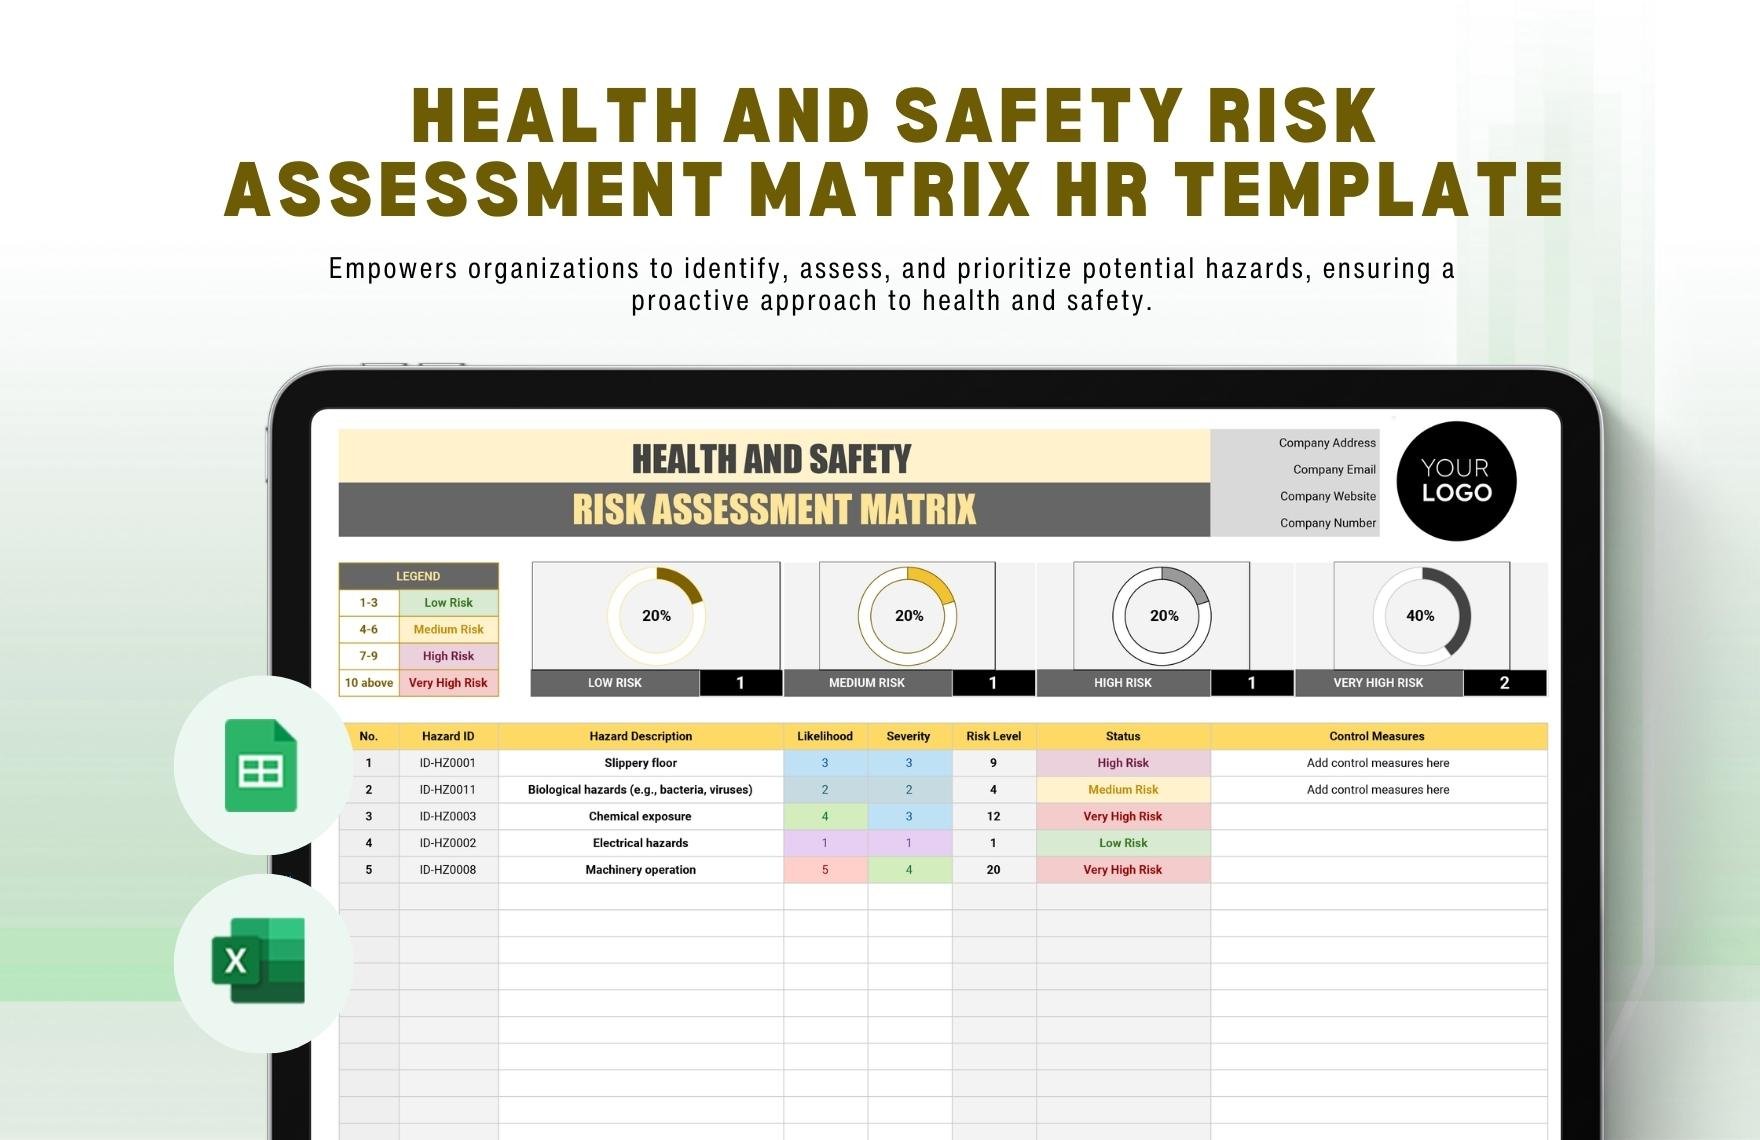 Health and Safety Risk Assessment Matrix HR Template